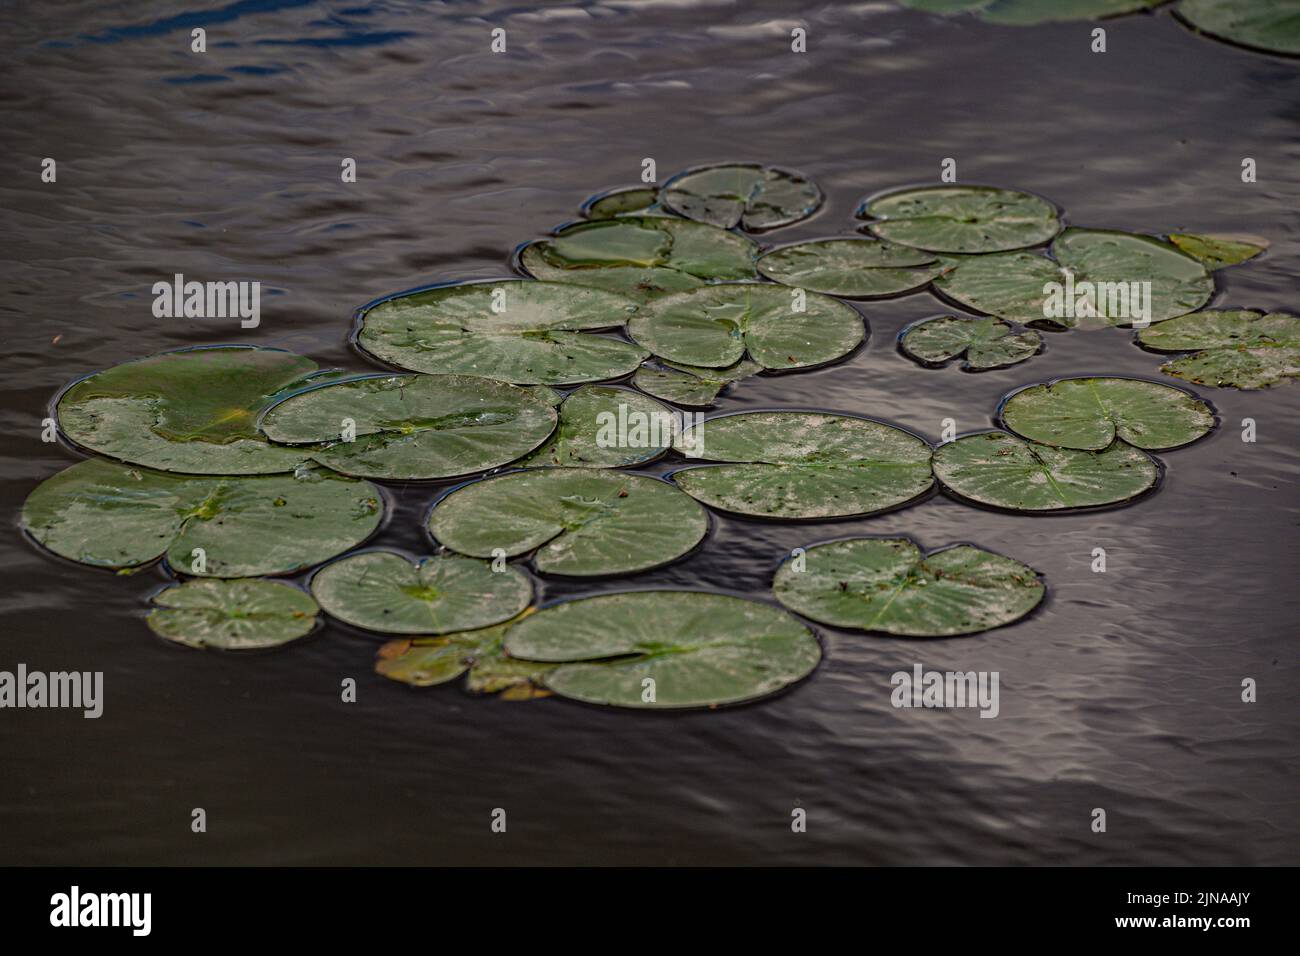 Some round Water Lilly Lotus pads in a lake Stock Photo